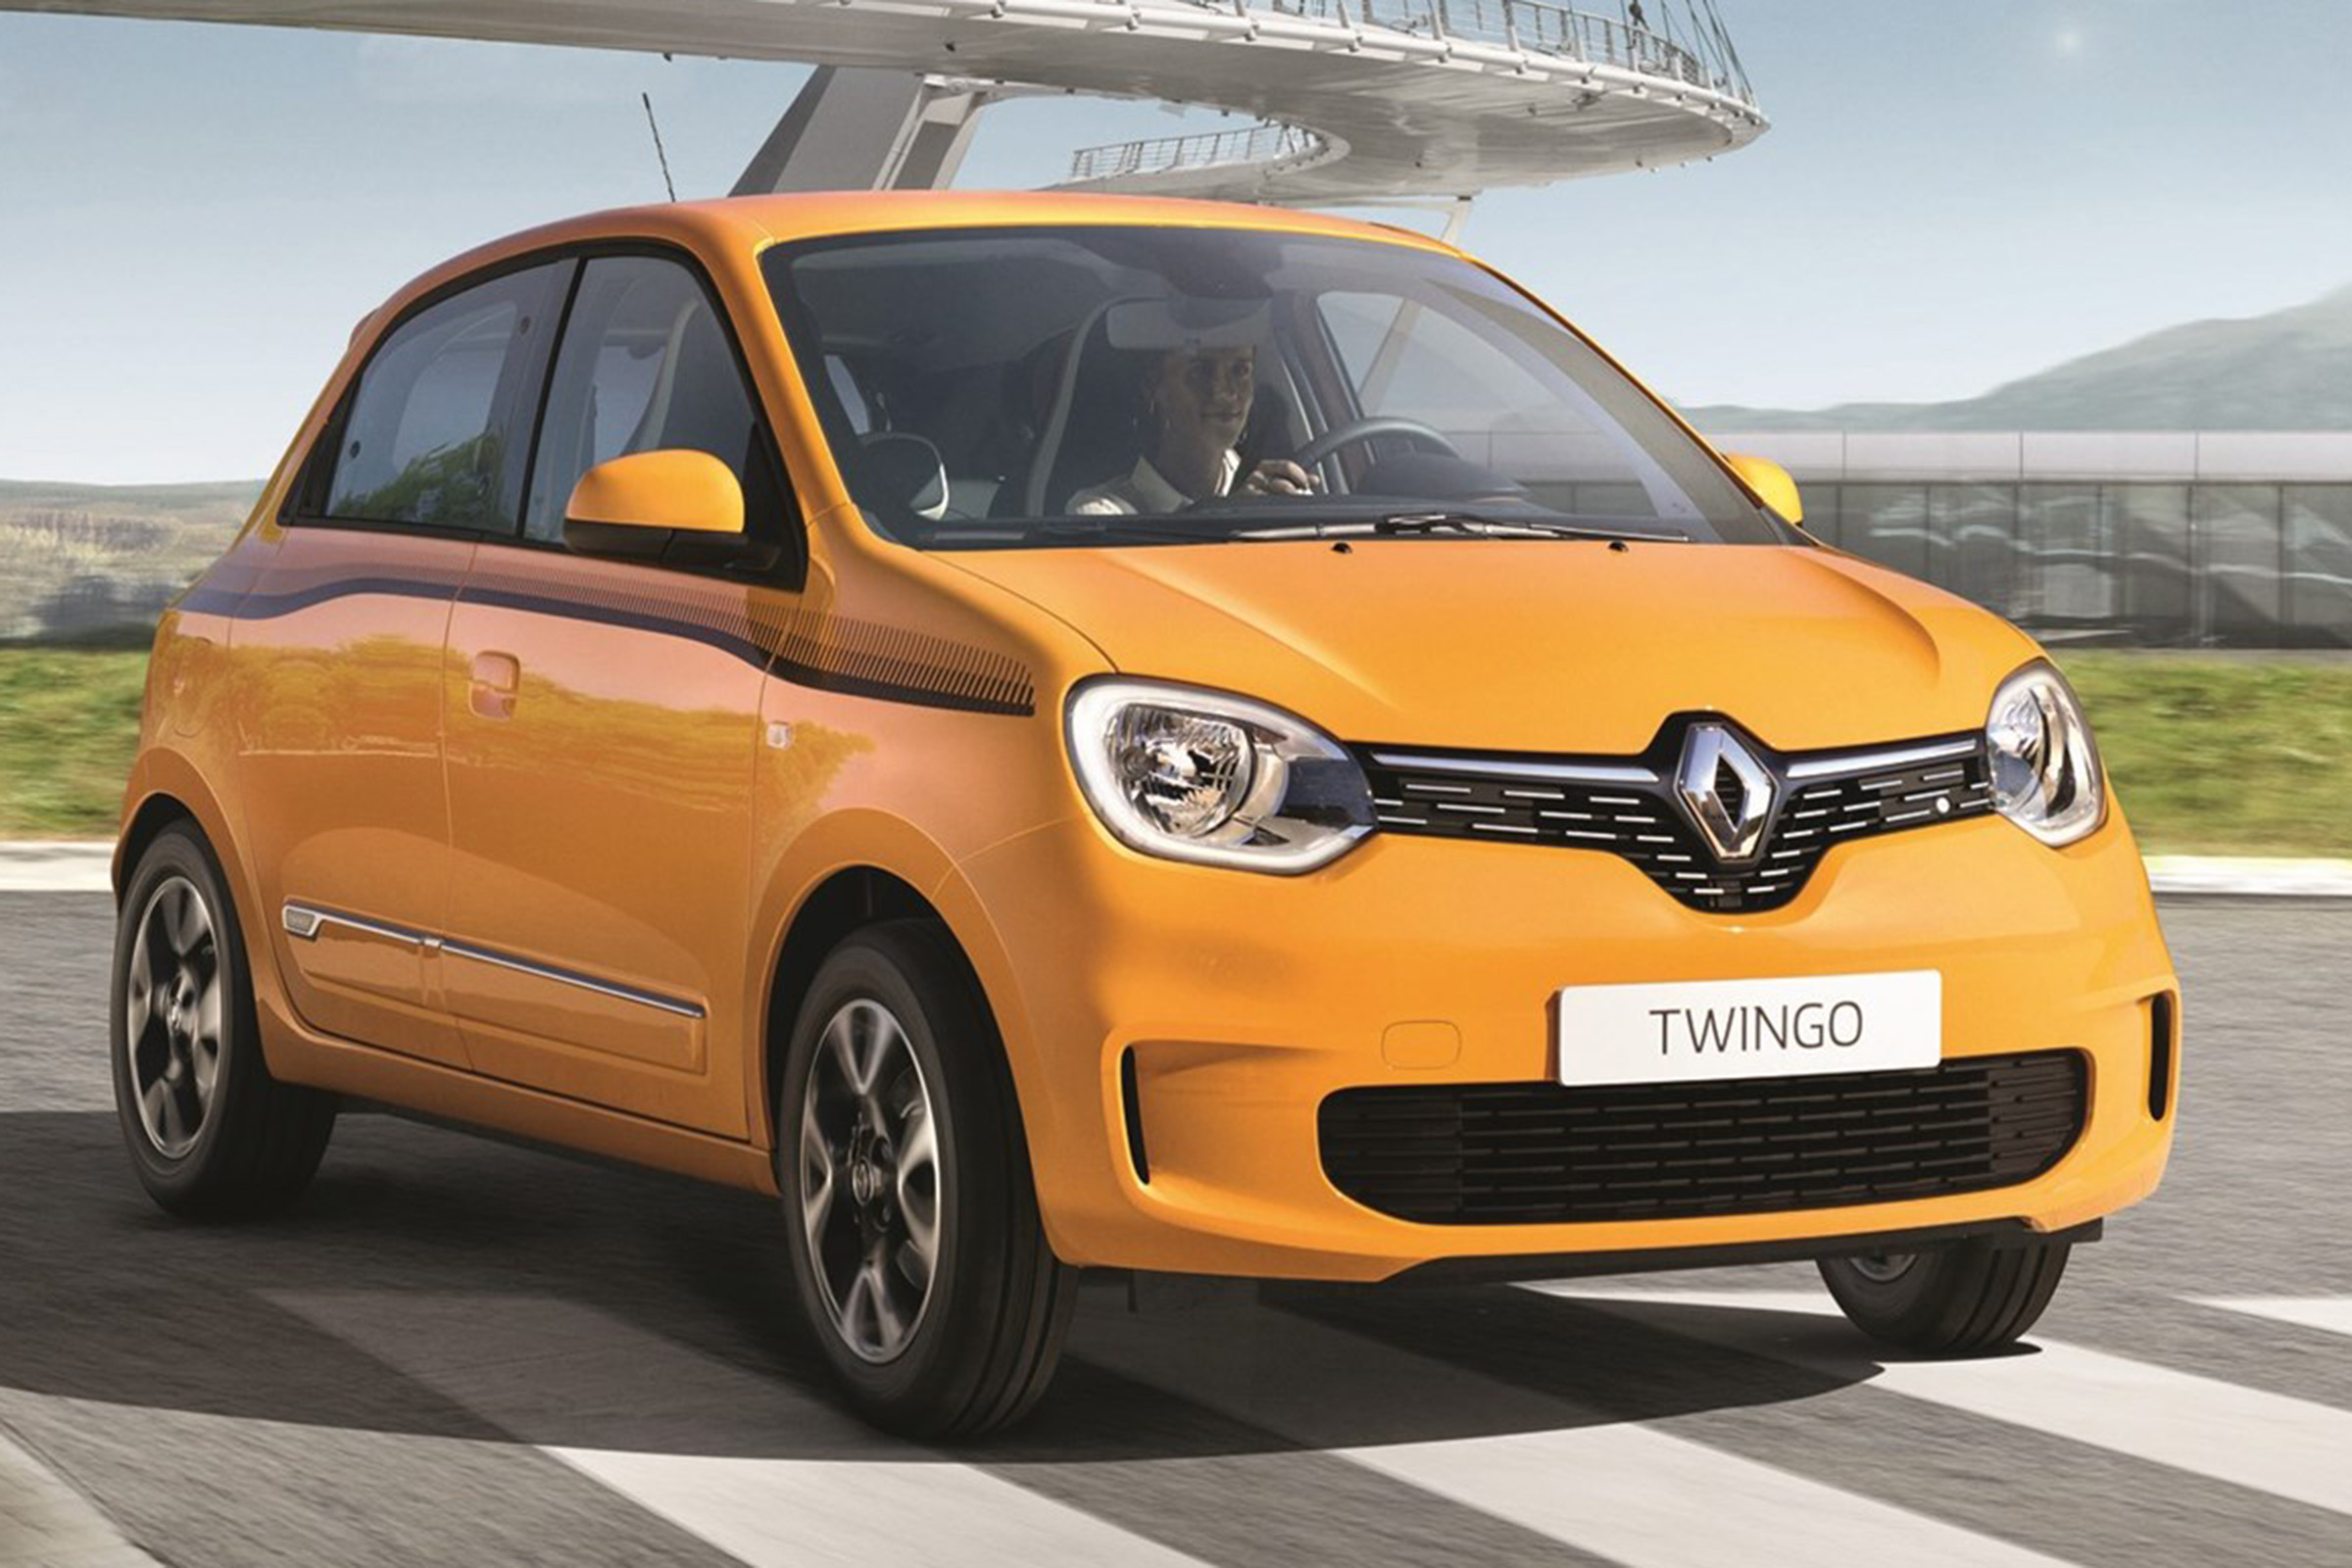 Renault Twingo Automatic For Sale